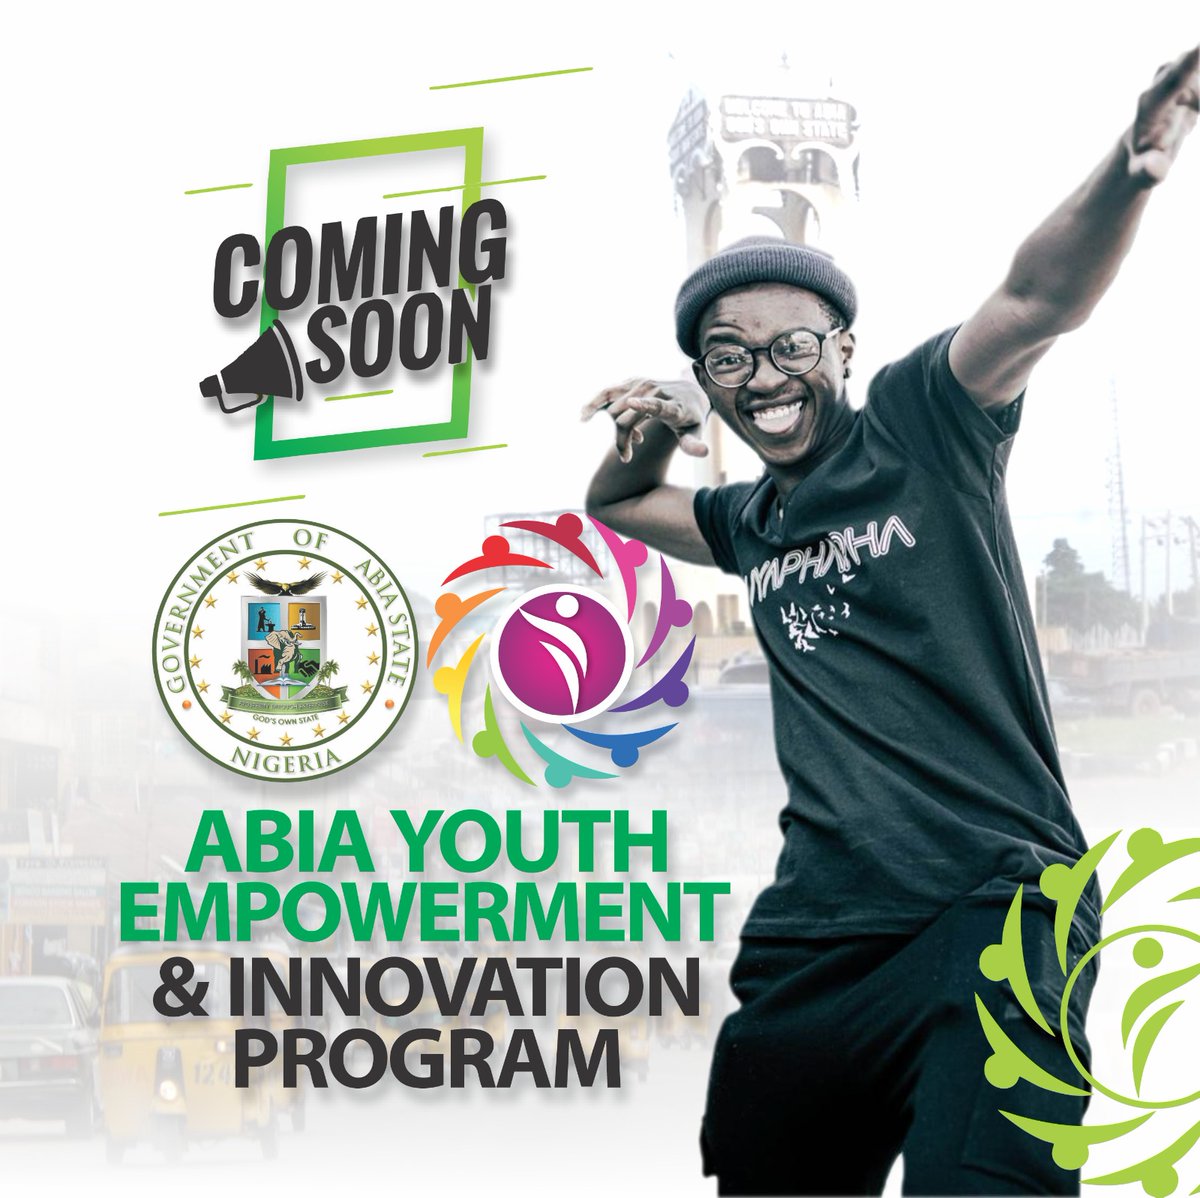 It's empowering 
It's innovative
It's inclusive
It's youth-centric
It's inspiring...

This is AYEIP!  Coming your way shortly, stay tuned!
.
.
#AYEIP #youthdevelopment #Abiayouthempowerment